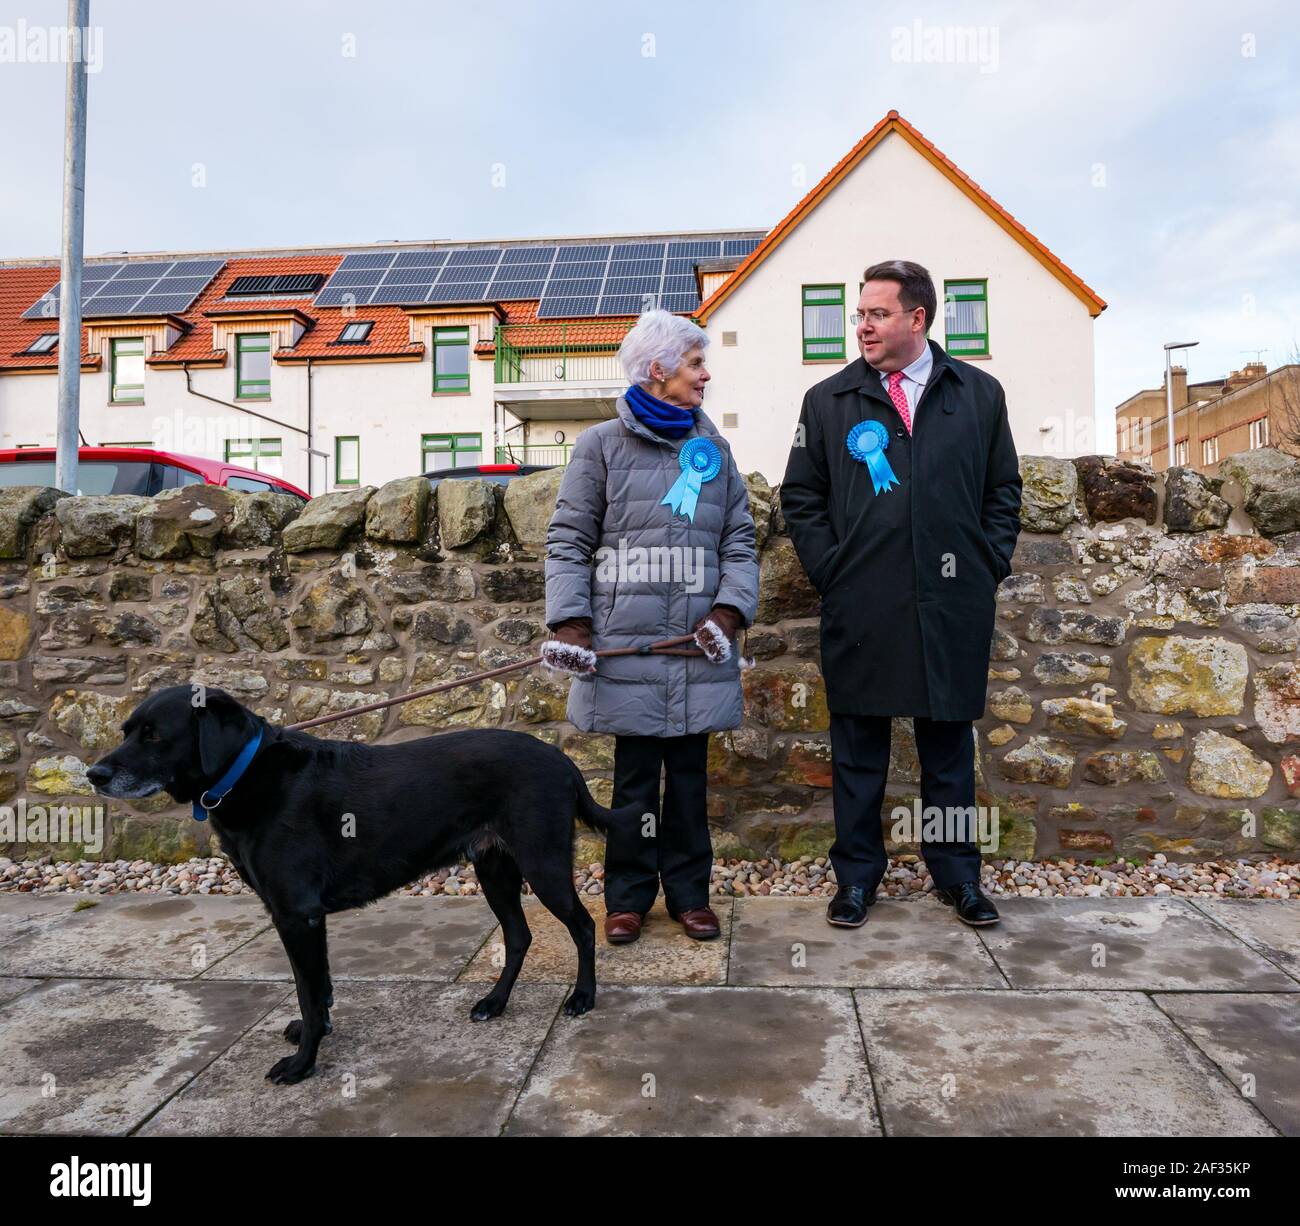 Gullane Bowling Club, East Lothian, Scotland, United Kingdom, 12th December 2019. UK election: A Scottish Conservative Party activist with a Labrador dog on a lead & Craig Hoy, the Scottish Conservative candidate at the local polling place Stock Photo